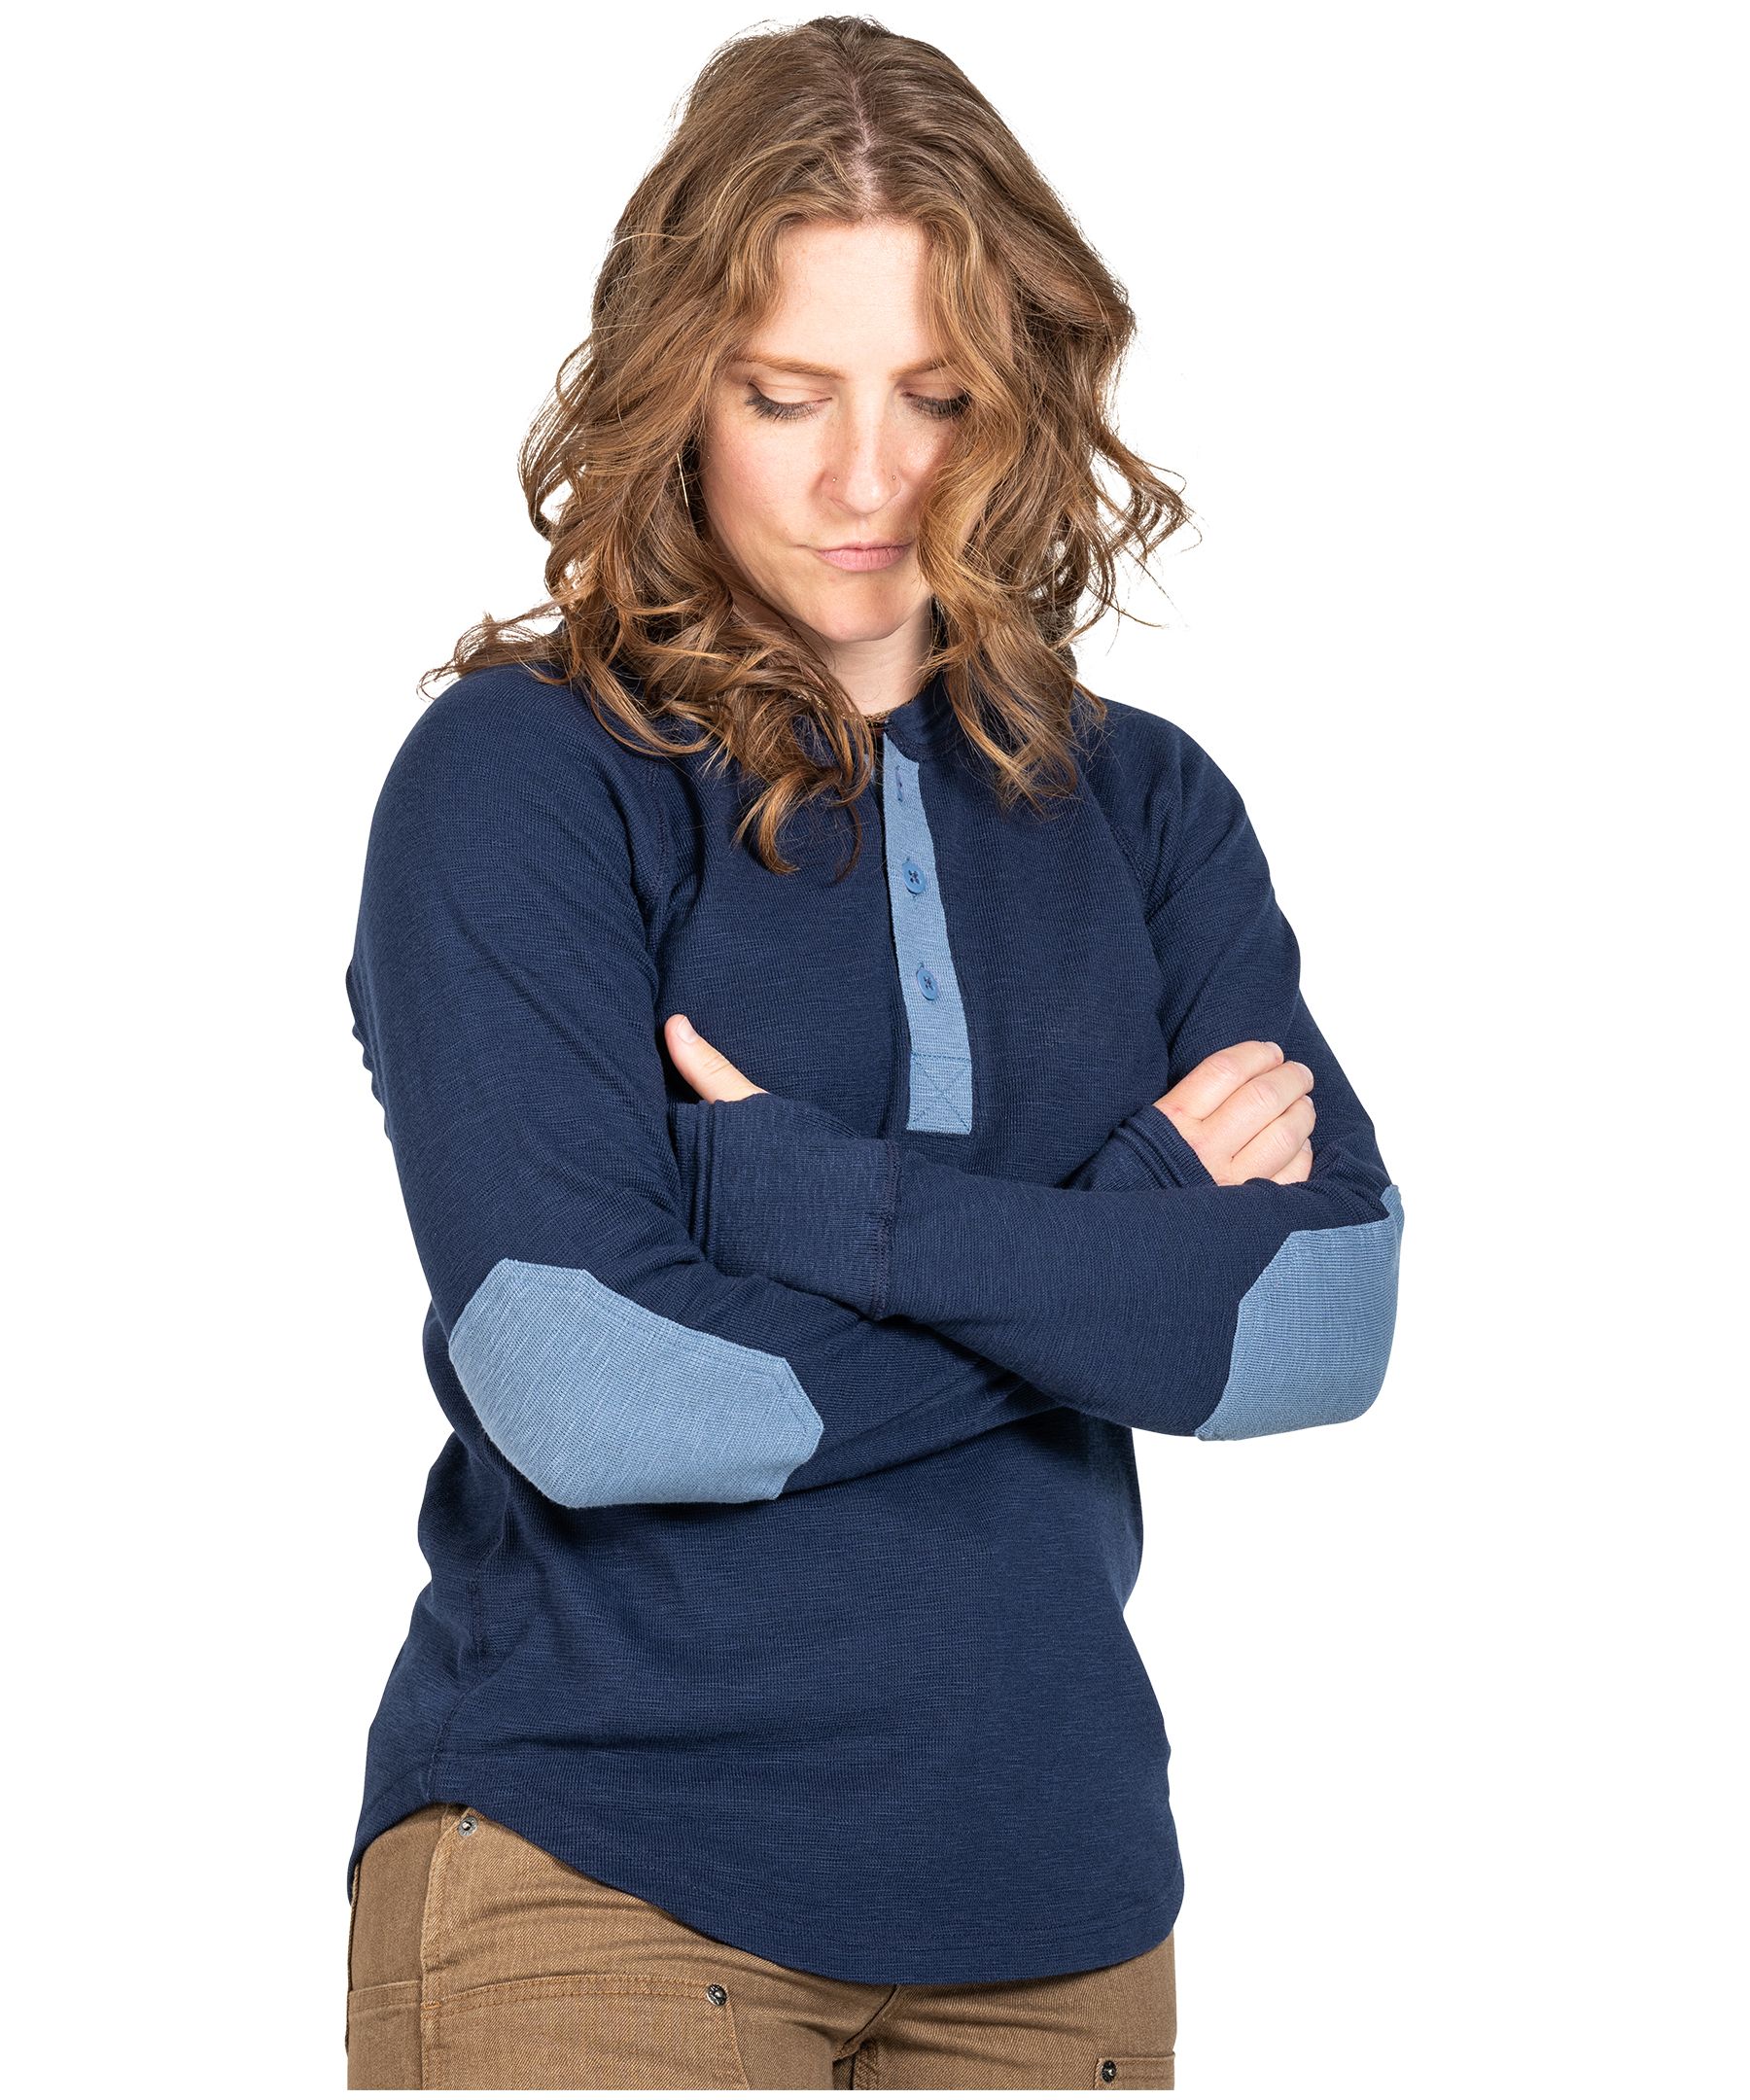 Dovetail Workwear Women's Rugged Thermal Henley Shirt